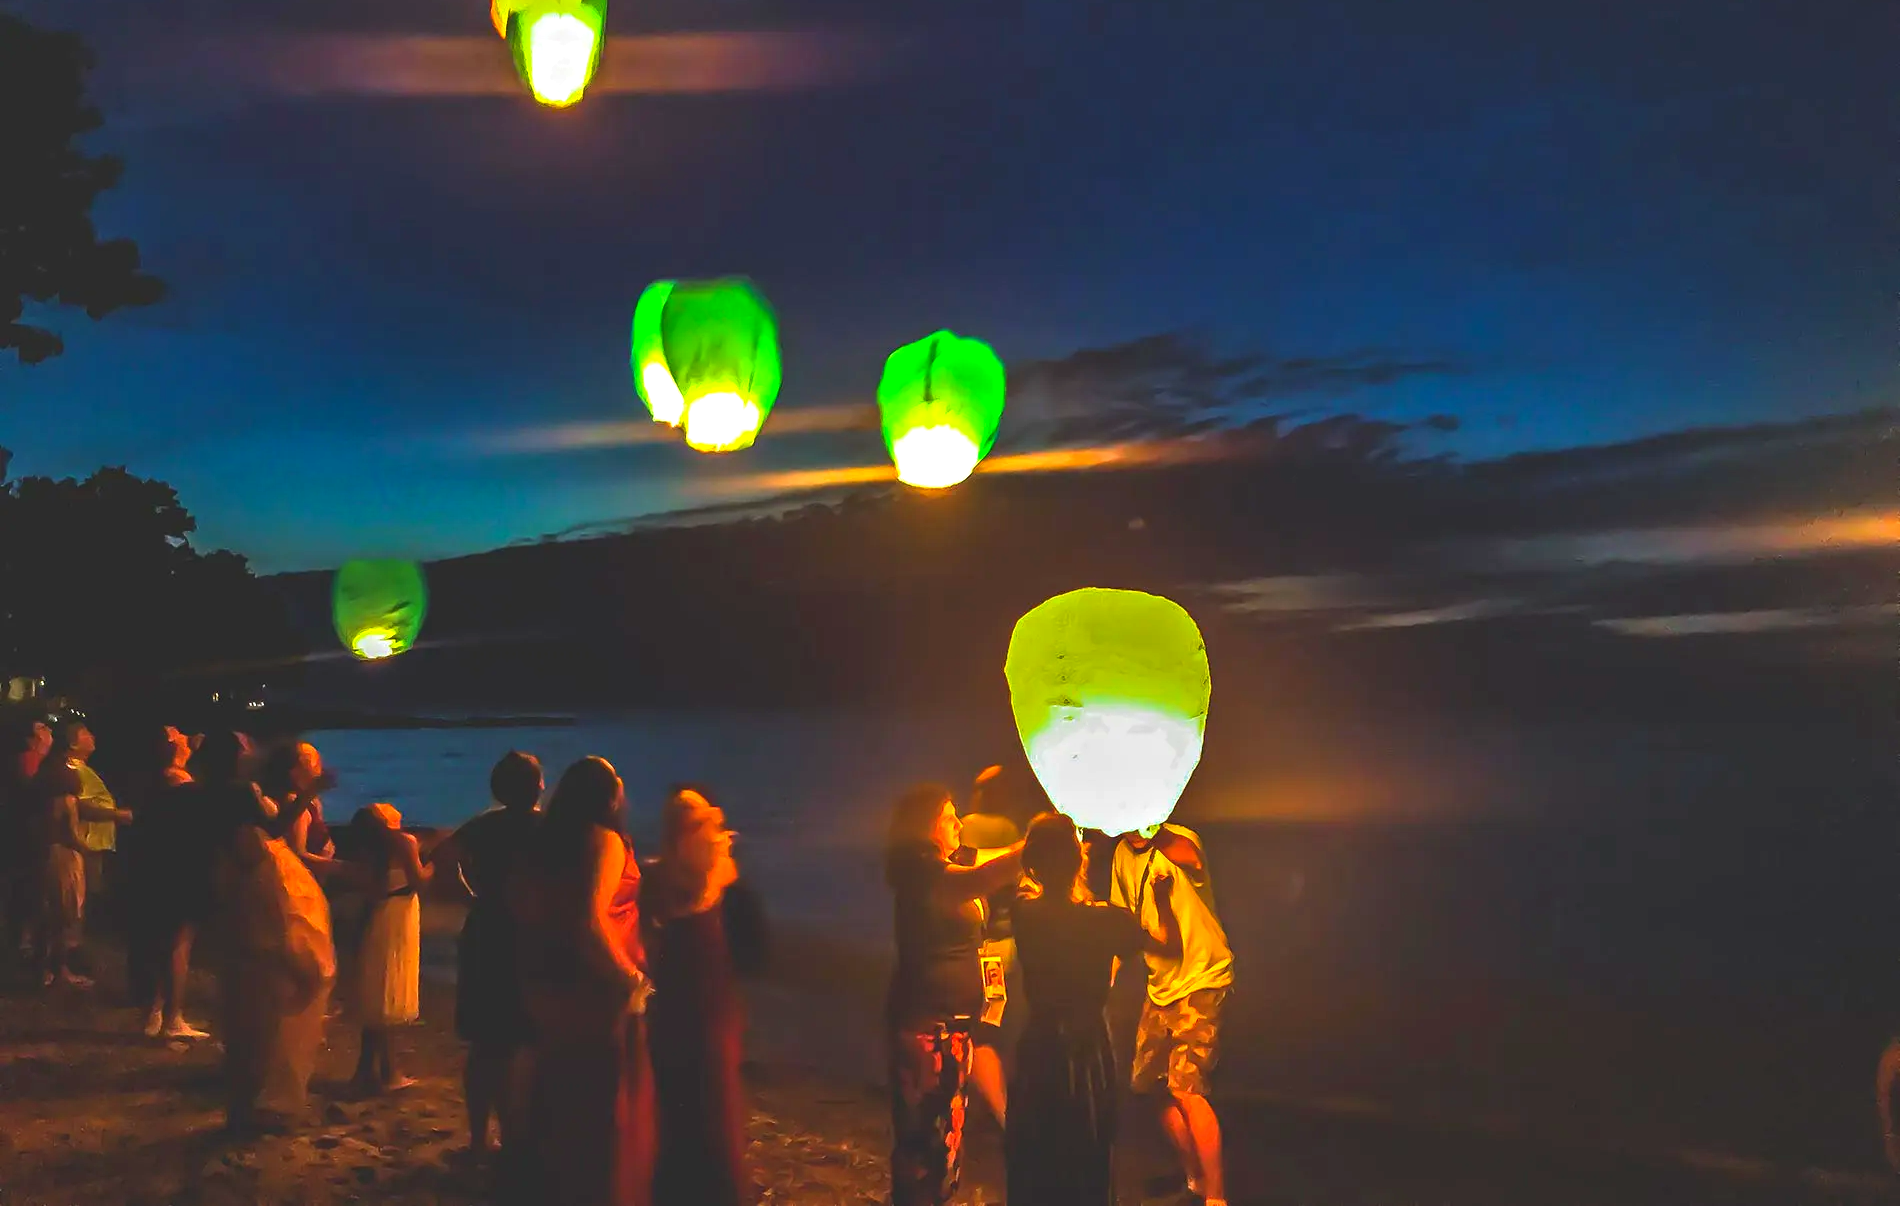 people at beach, lanterns floating in sky at night